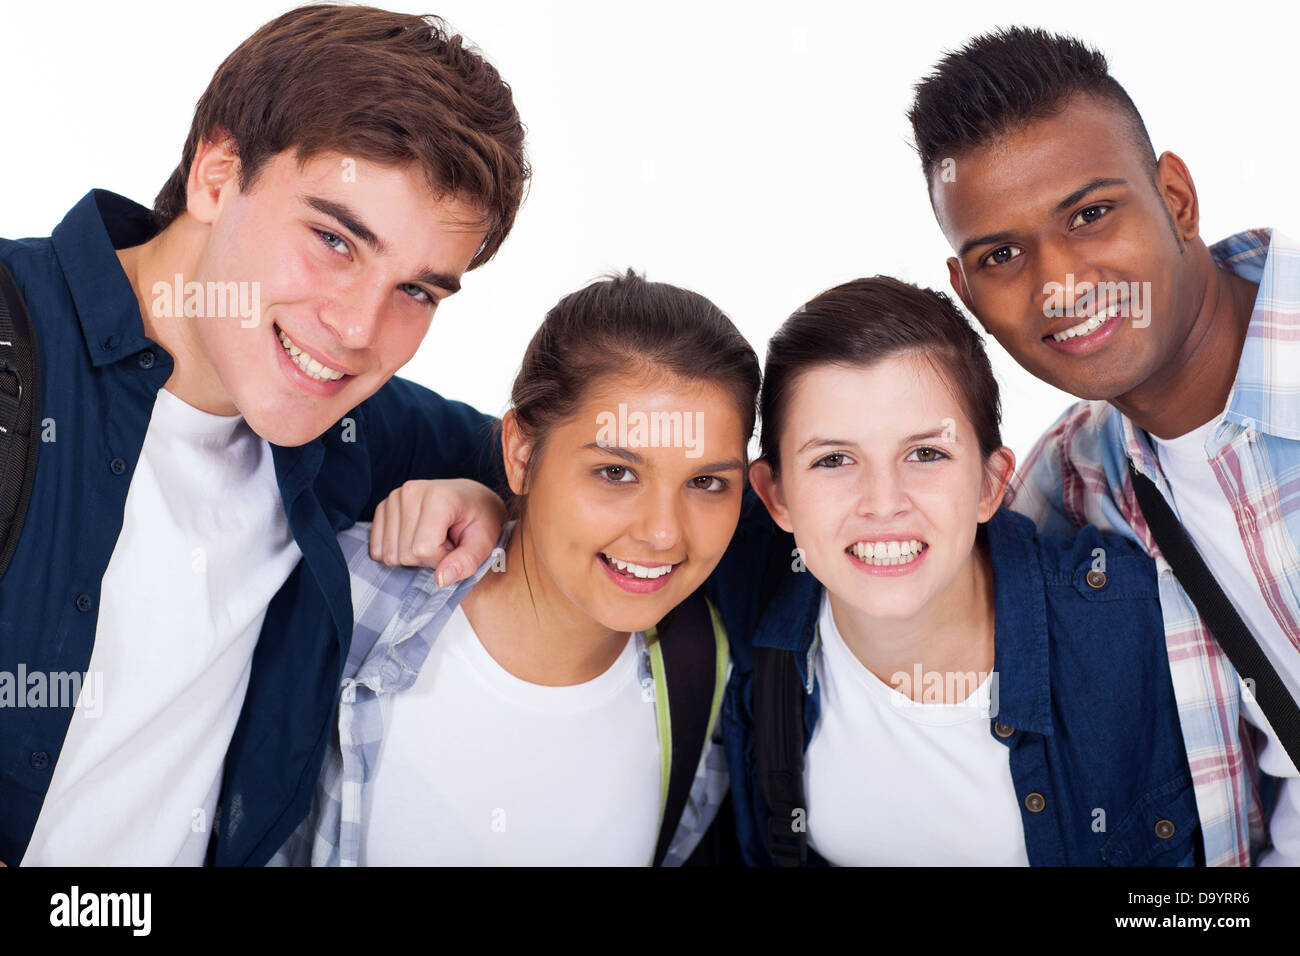 closeup portrait of smiling high school students isolated on white Stock Photo